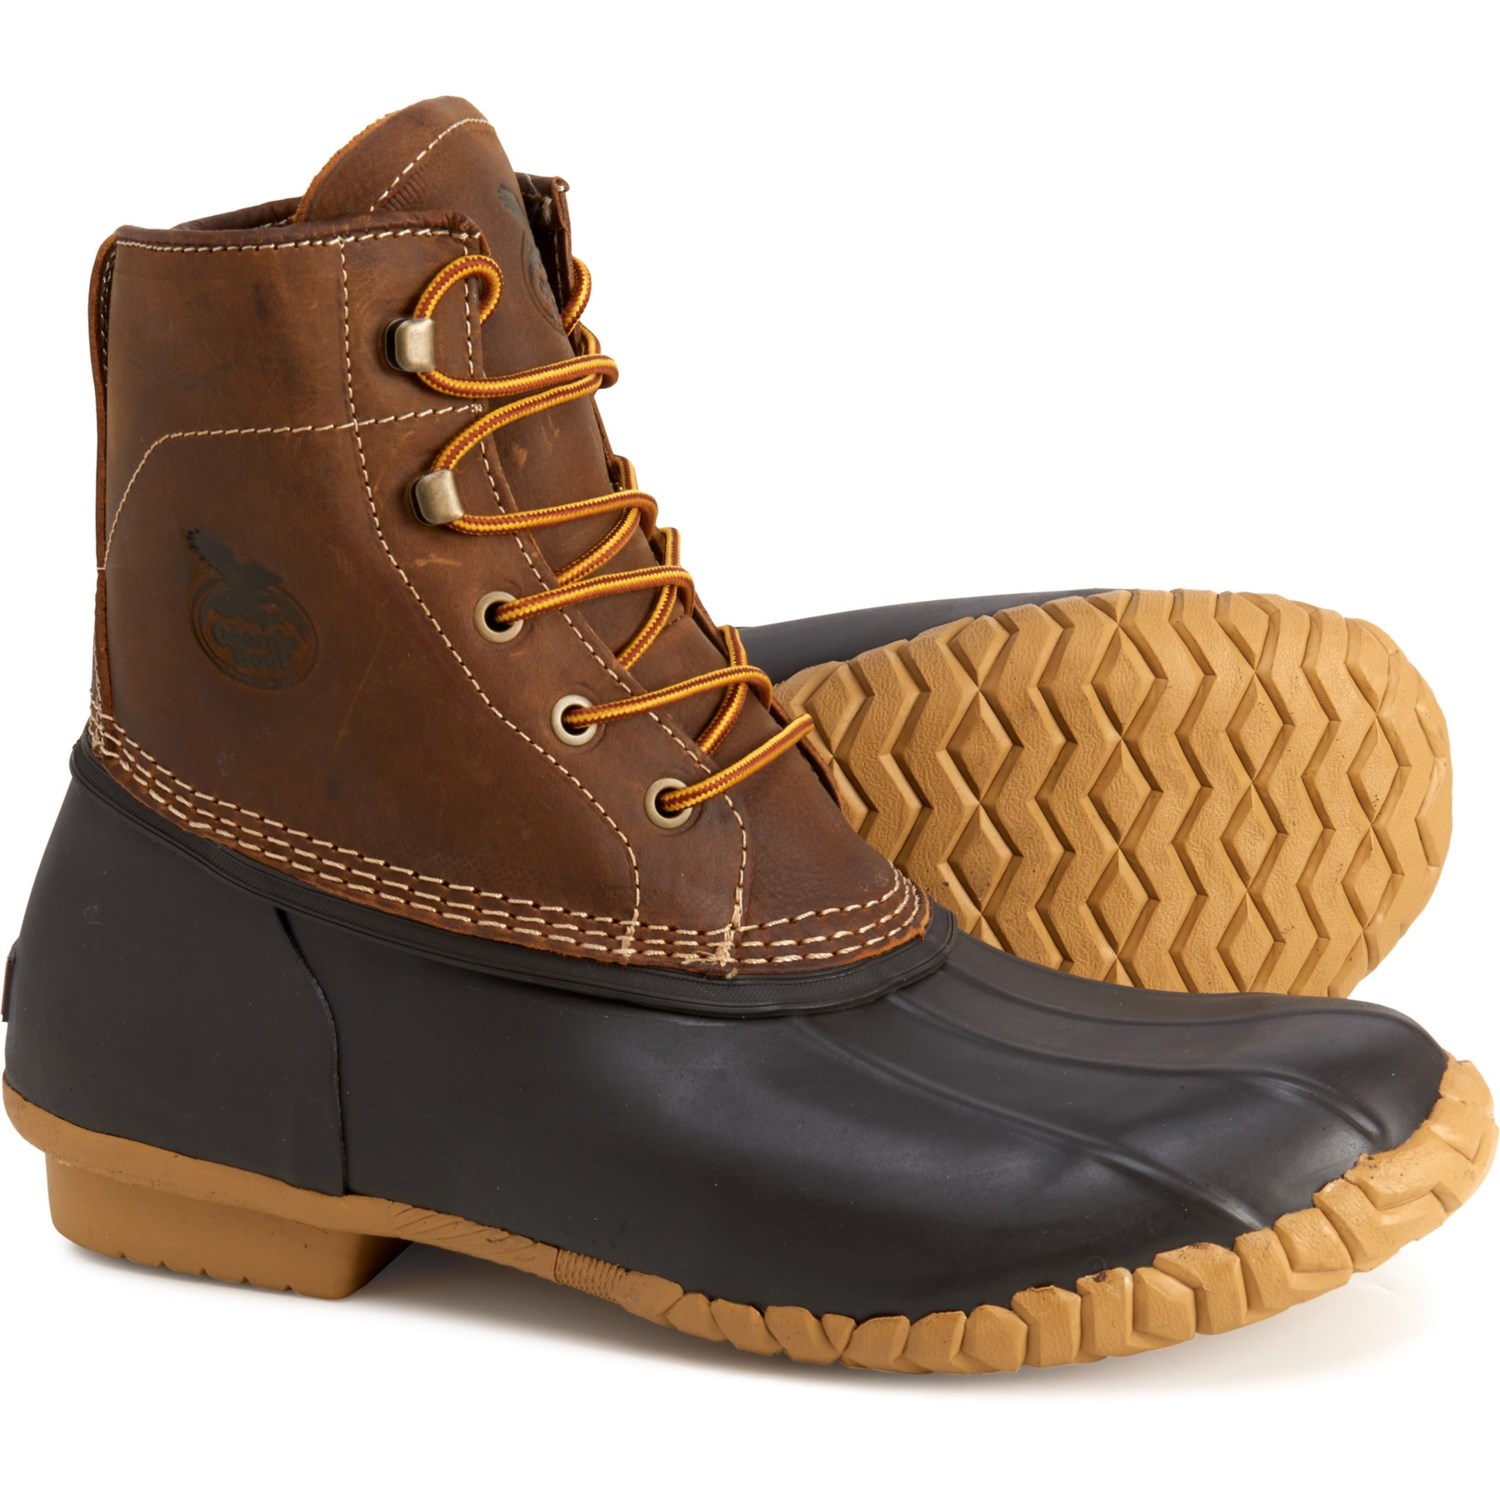 Georgia Boot Marshland Duck Boots (For Men) - Save 67%